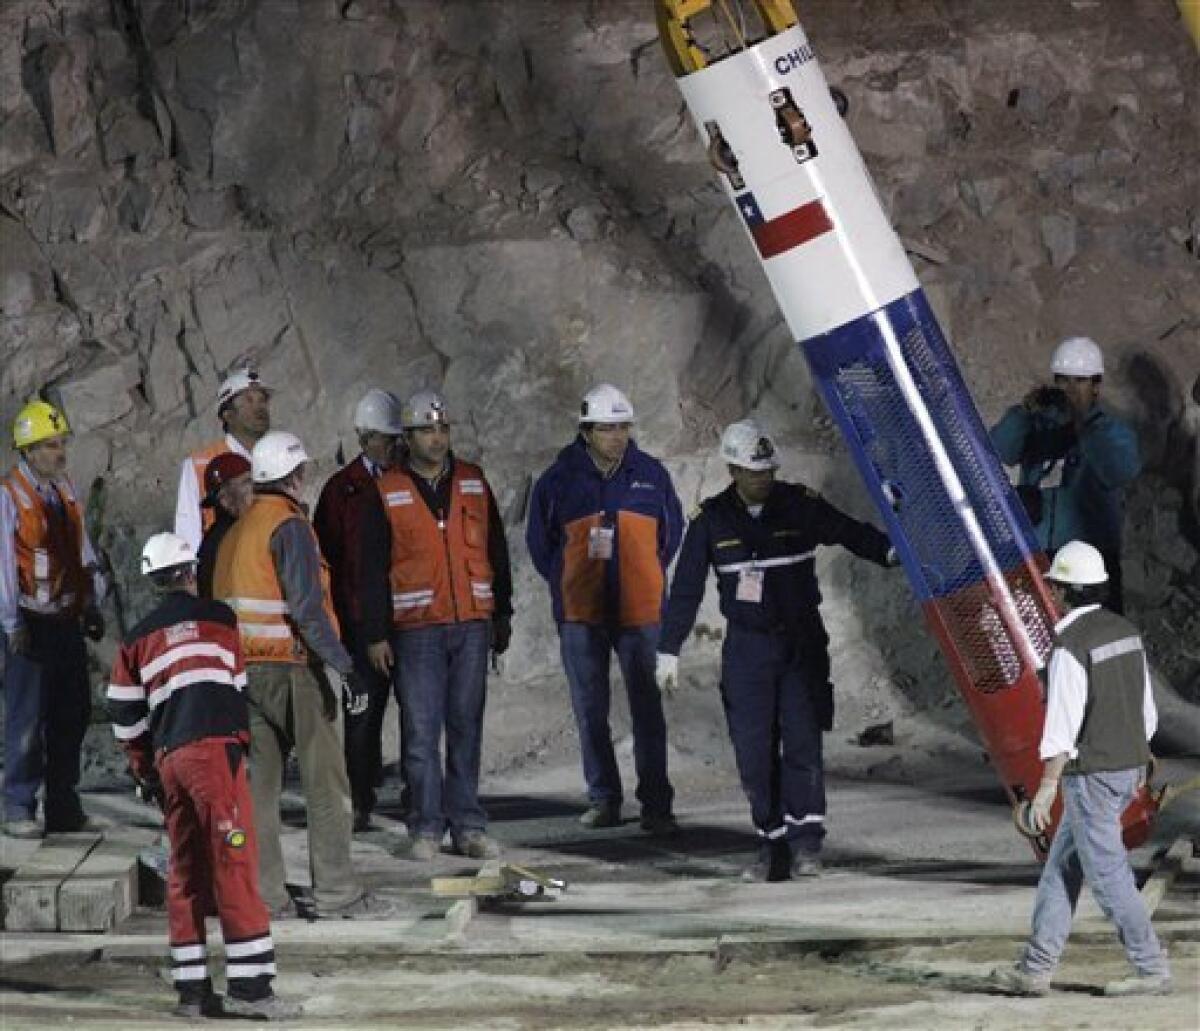 Rescue workers and officials test the rescue capsule that will be used to extract the 33 trapped miners one by one at the San Jose Mine near Copiapo, Chile, Tuesday Oct. 12, 2010. The first of 33 trapped miners is expected to be lifted to the surface late Tuesday after surviving more than two months below ground. (AP Photo/Jorge Saenz)